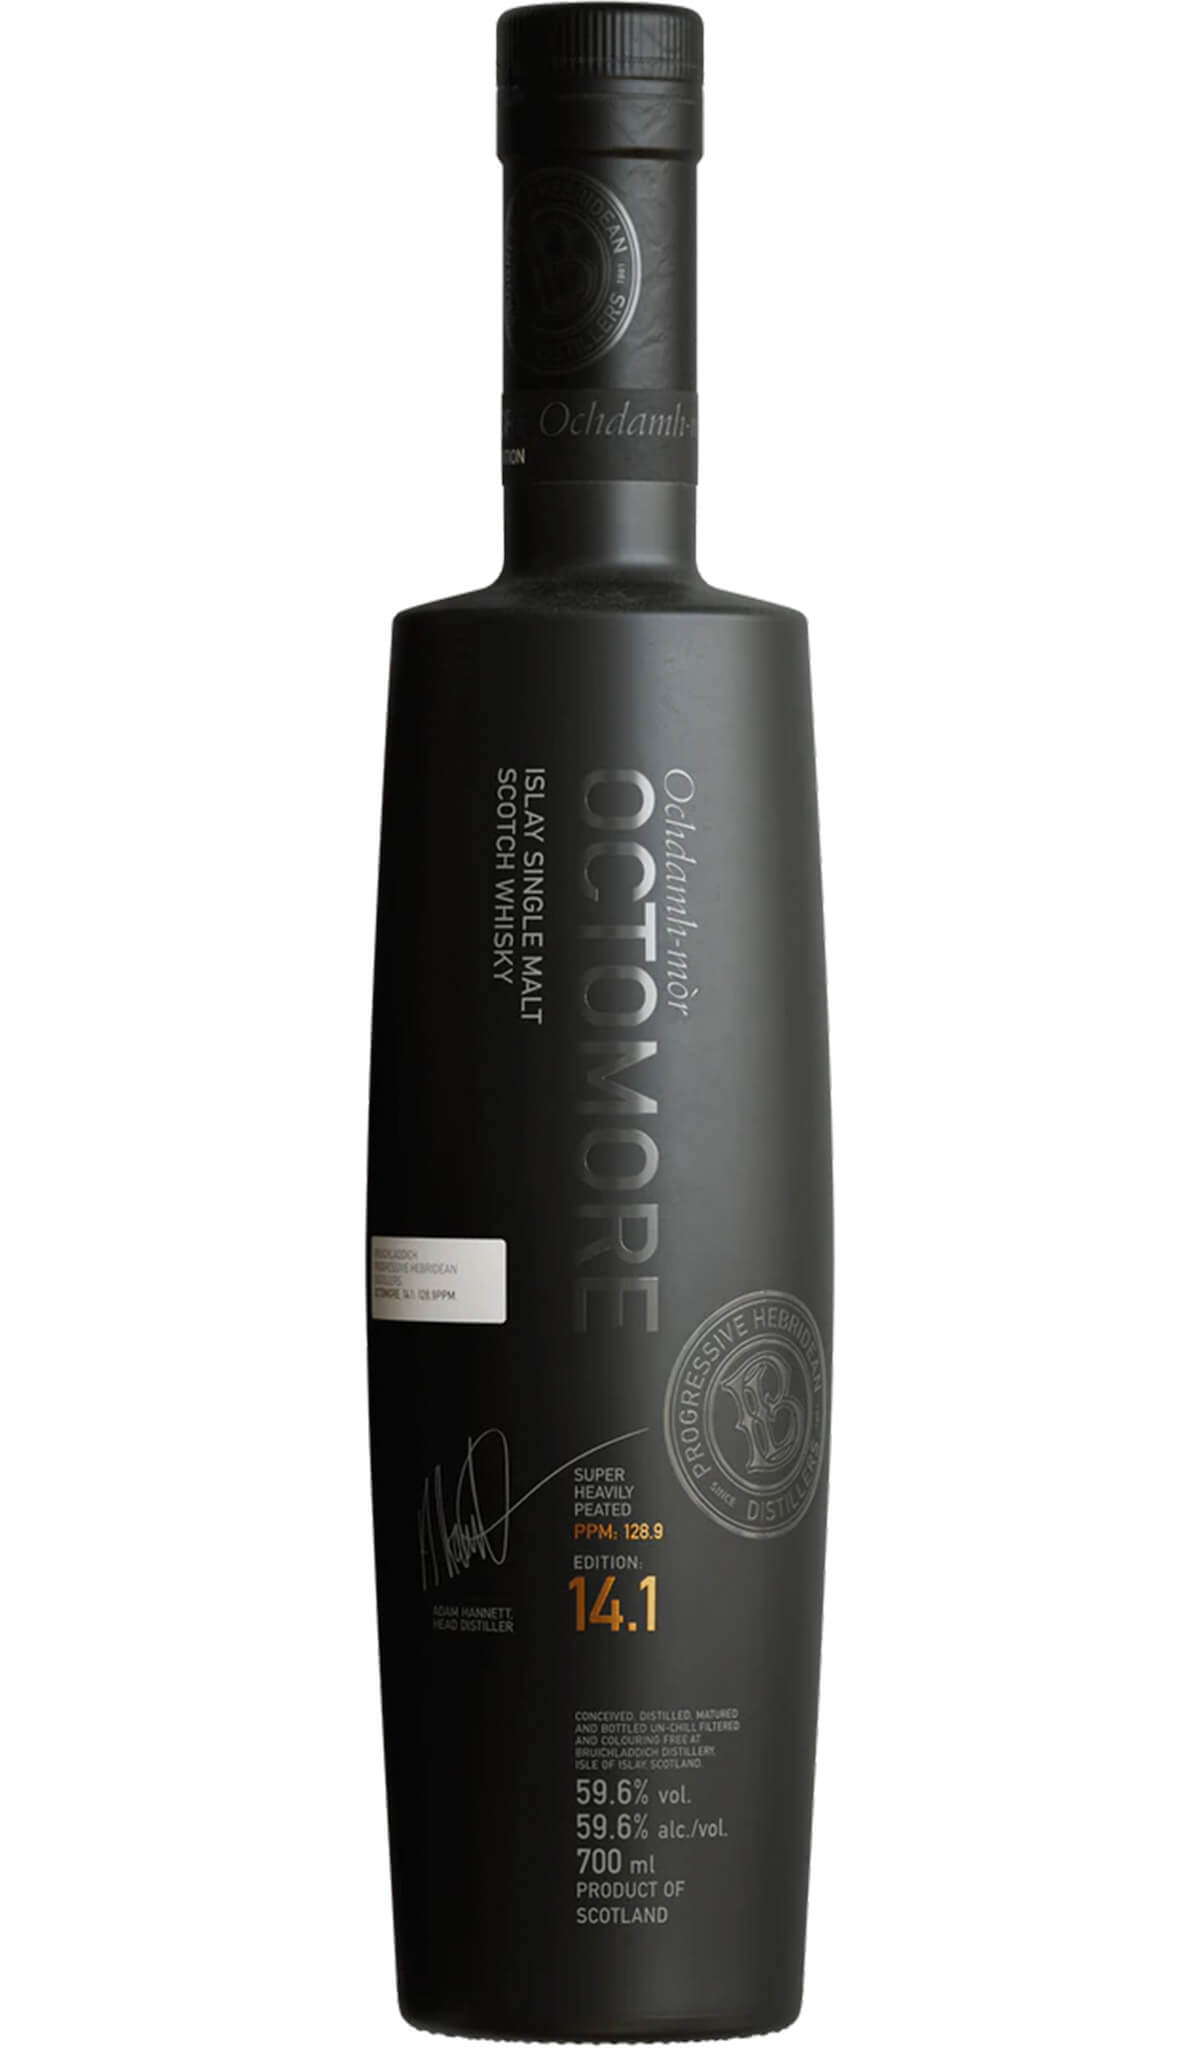 Find out more, explore the range and purchase Bruichladdich Octomore 14.1 Edition 700mL available online at Wine Sellers Direct - Australia's independent liquor specialists.